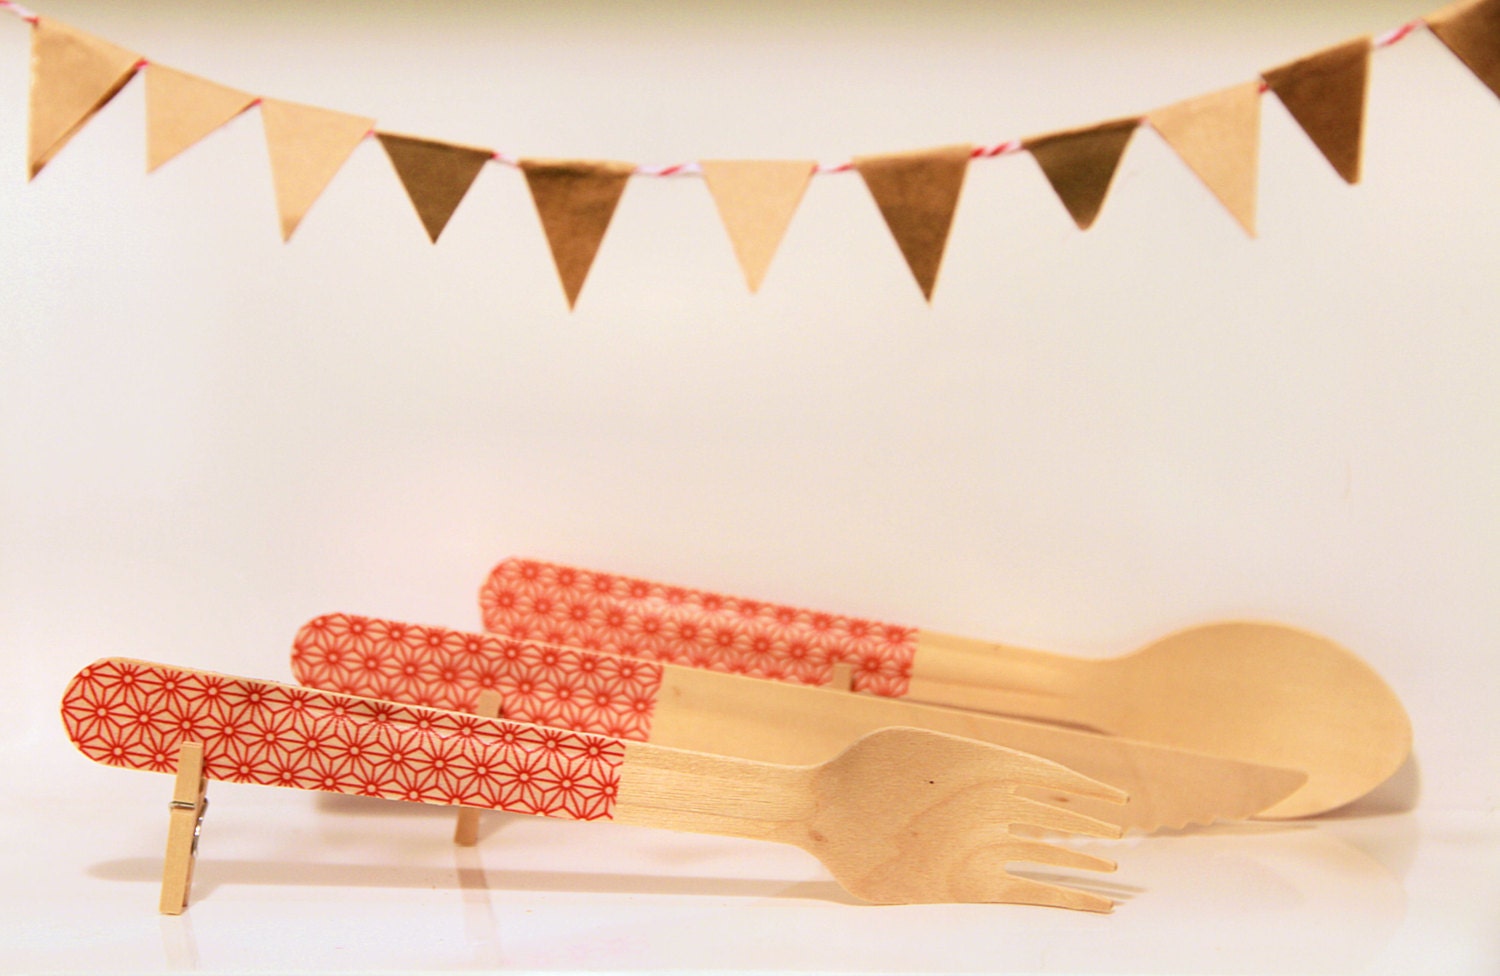 Clothed Cutlery in Red Starflakes - Disposable Washi-Patterned Wooden Forks, Spoons or Knives (A Dozen) - Gloriousmess